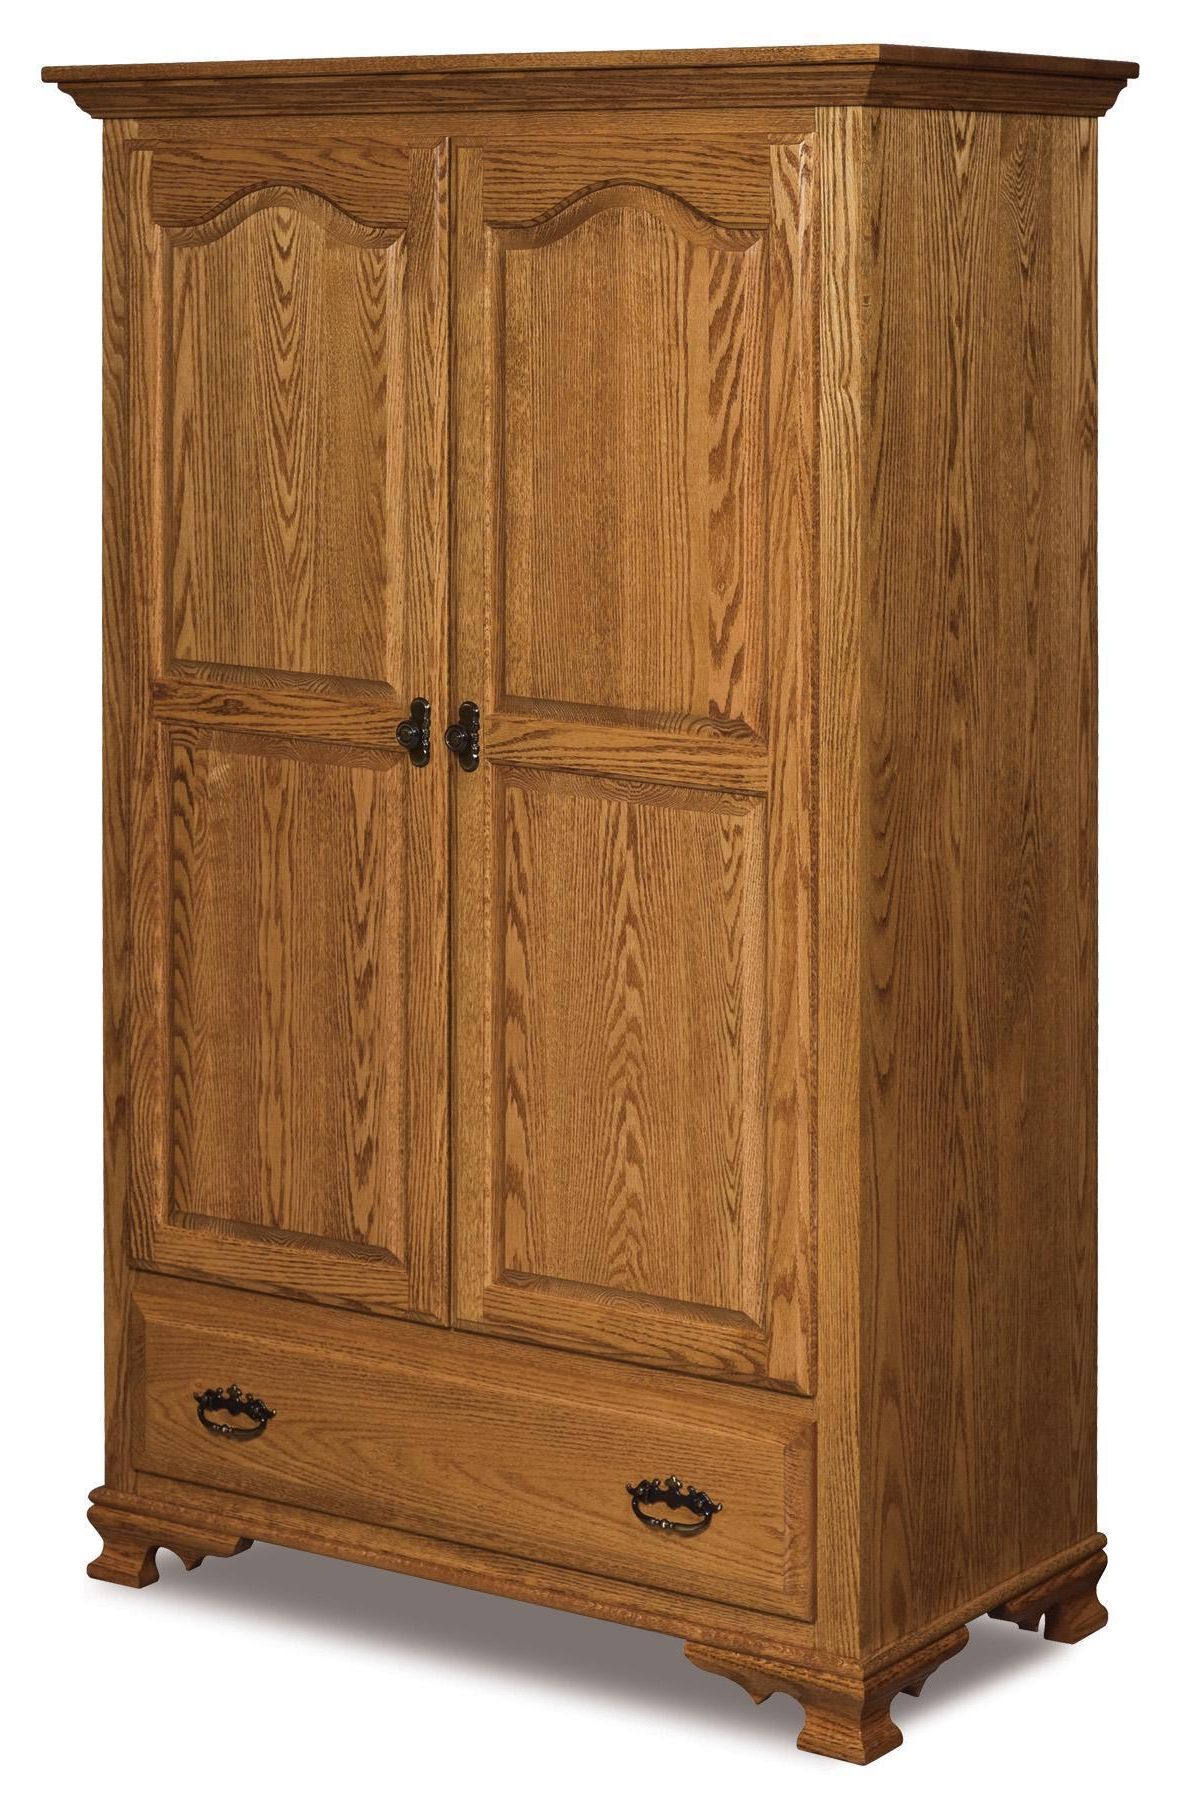 Heritage Wilma Wardrobe Armoire From Dutchcrafters Amish Furniture Regarding Old Fashioned Wardrobes (Gallery 8 of 20)